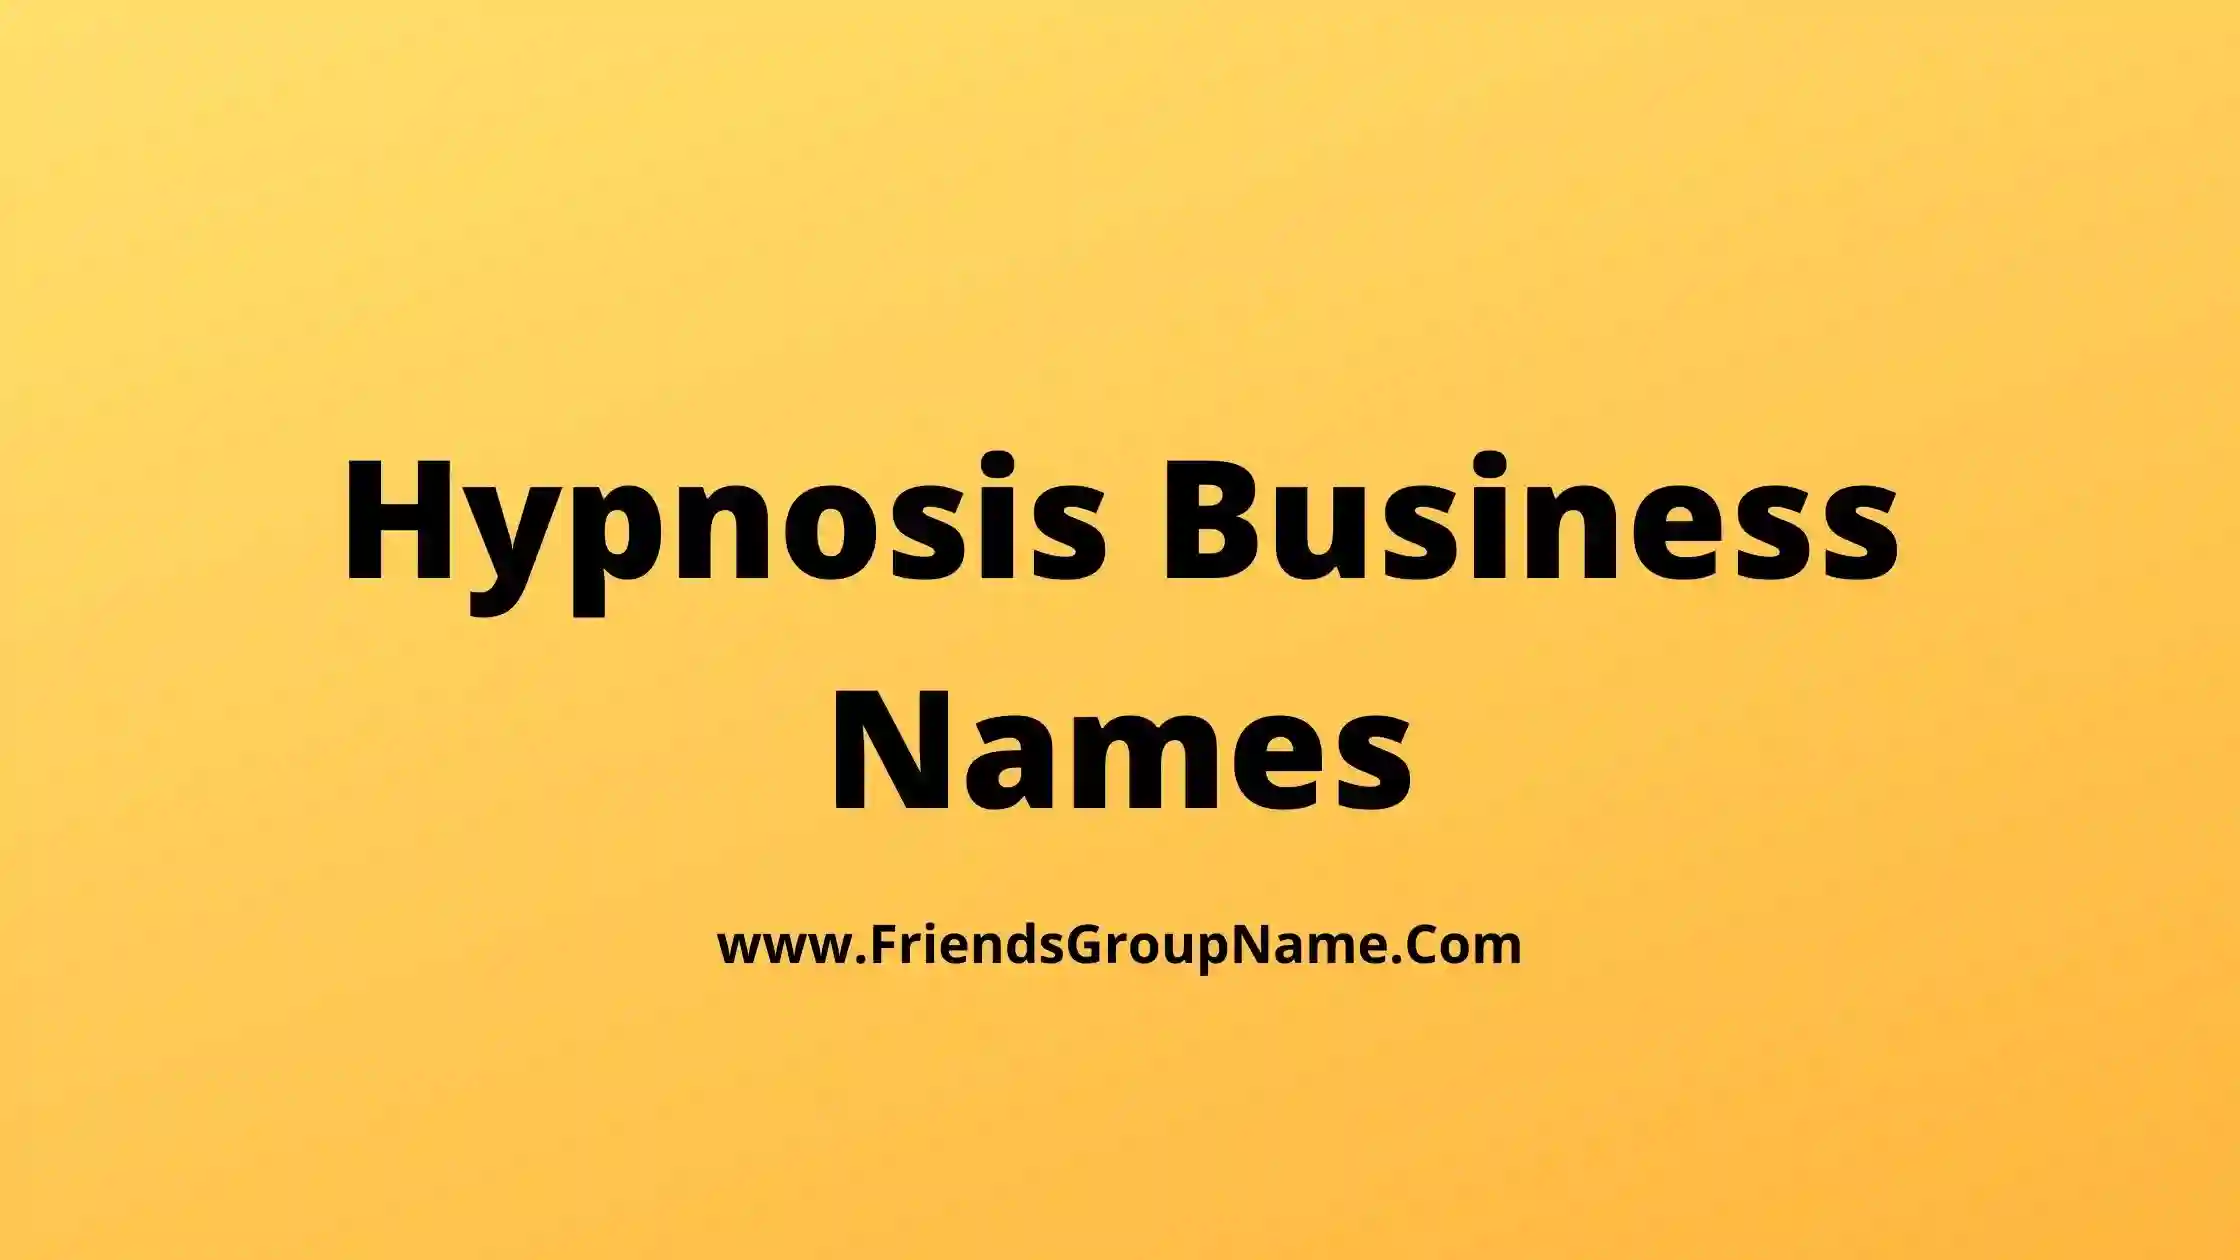 Hypnosis Business Names